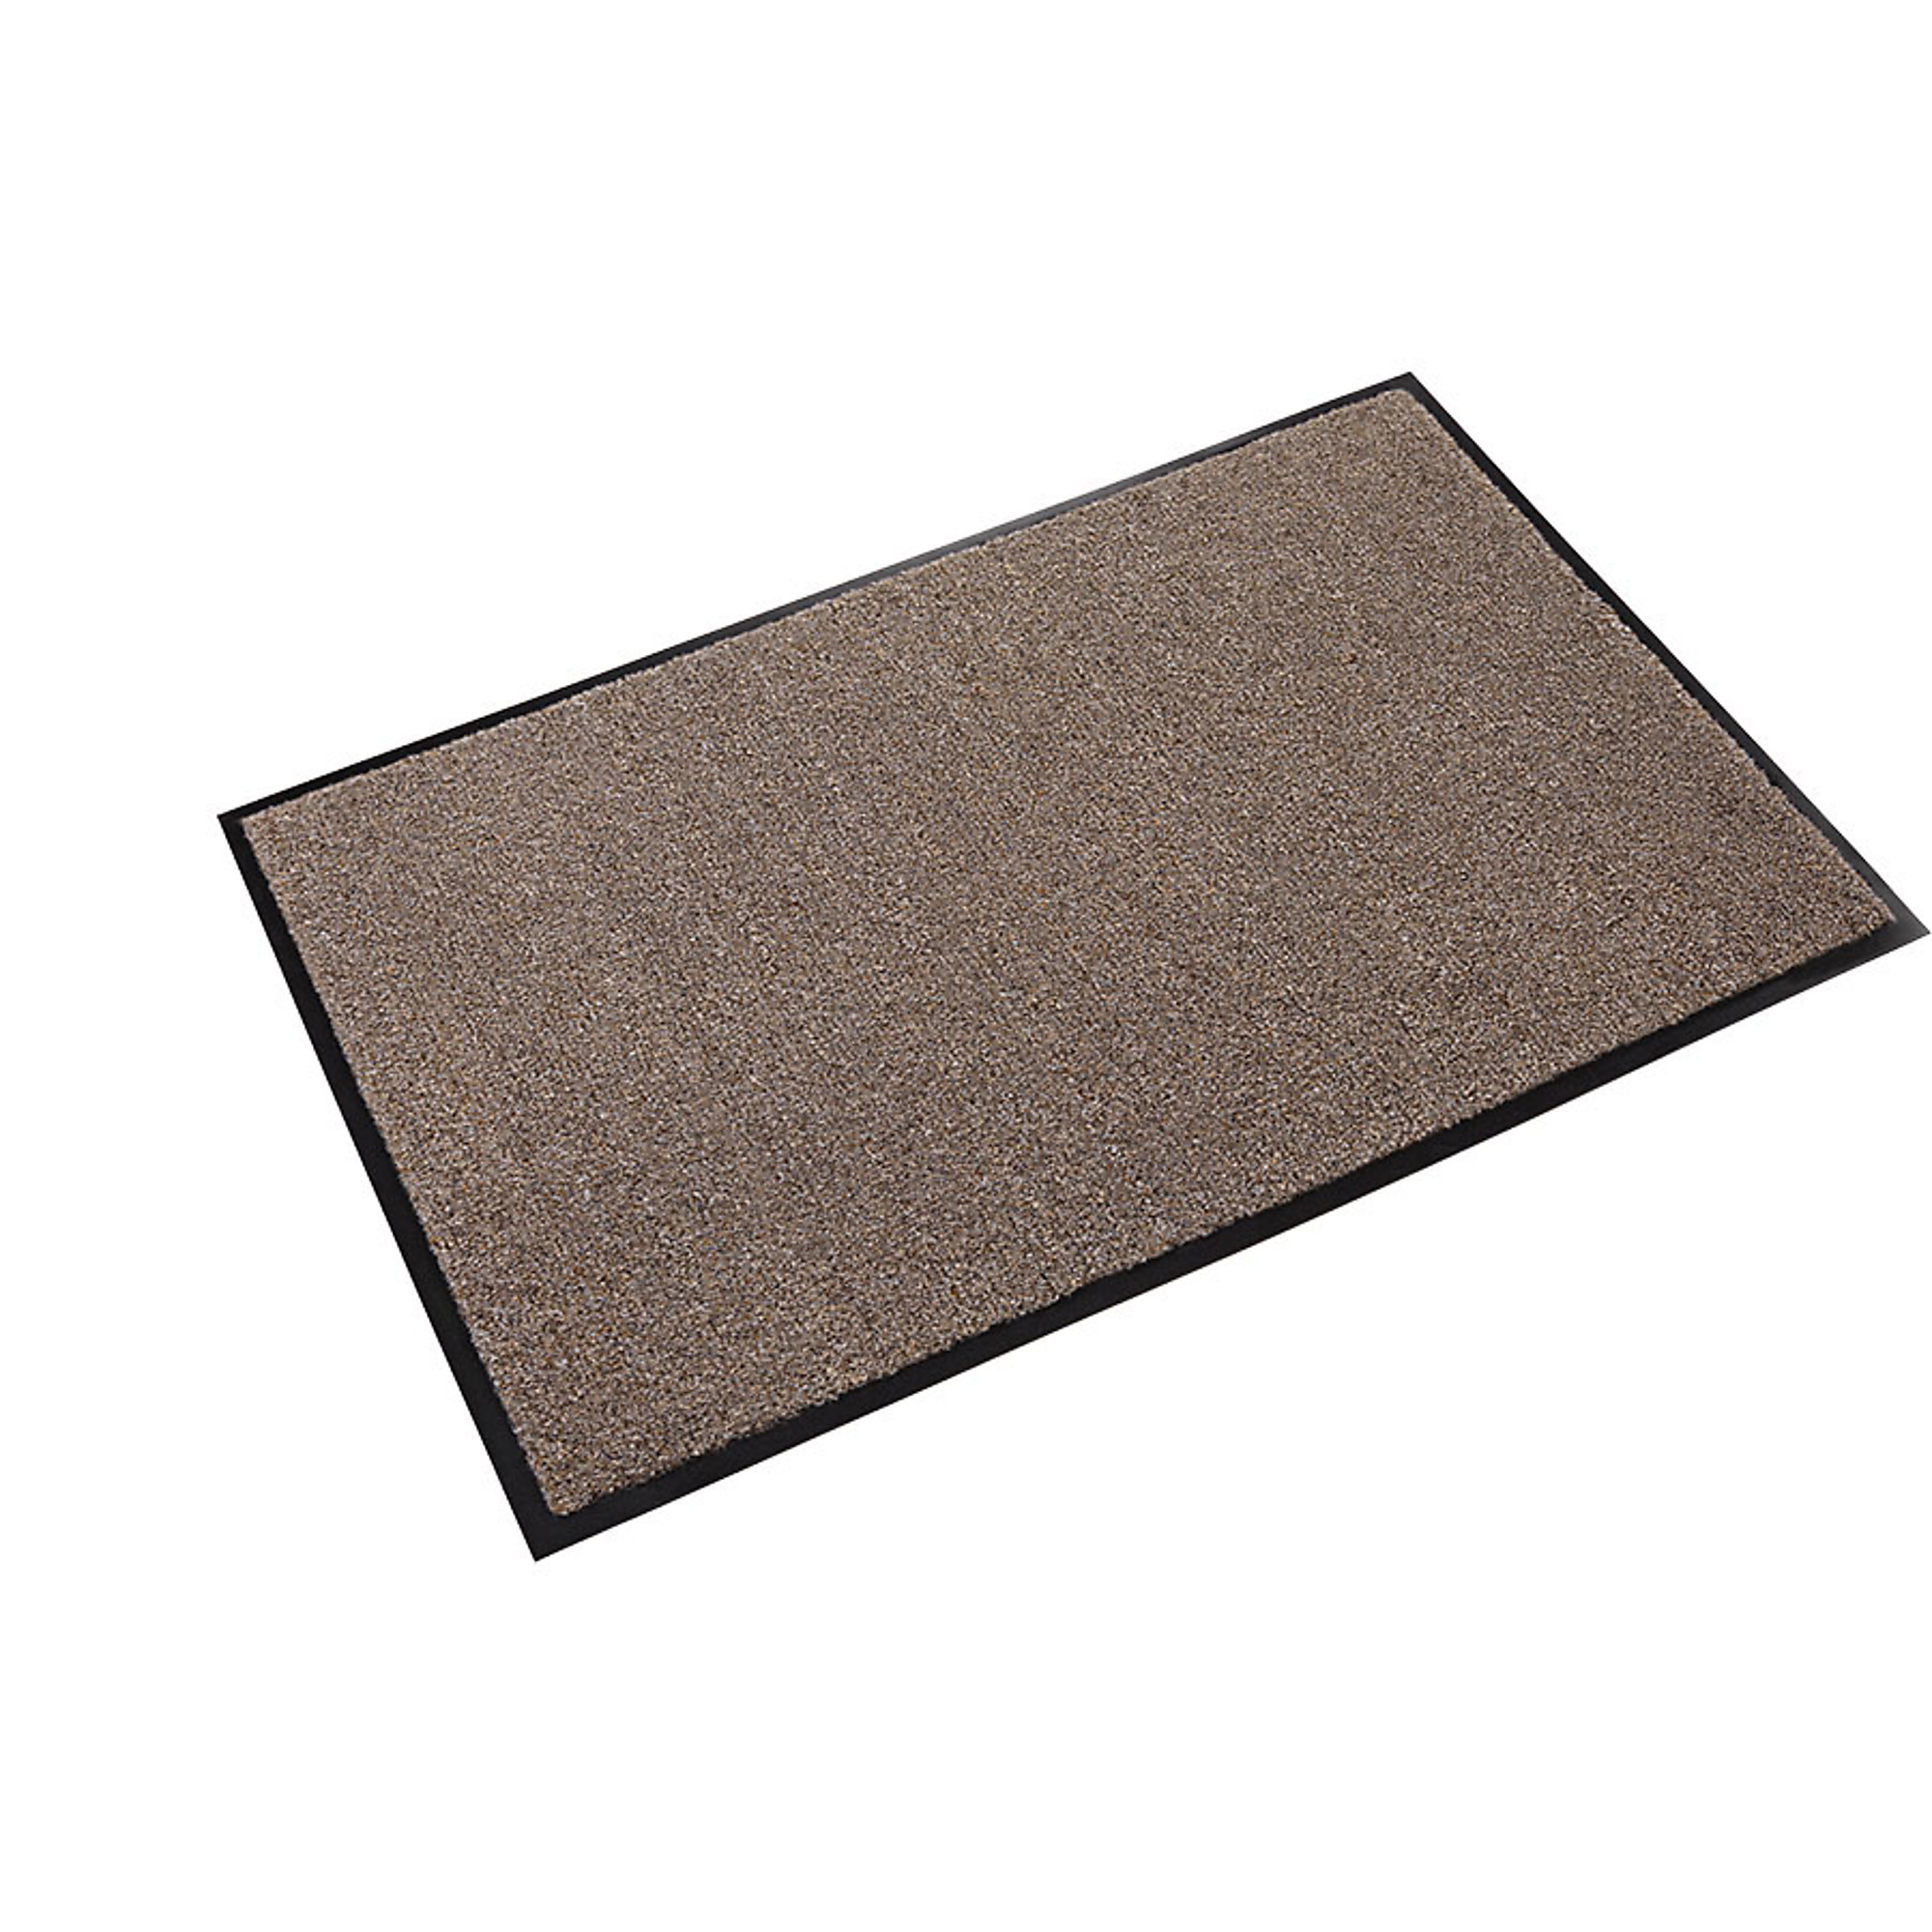 Crown Matting Technologies, Rely-On Olefin 3ft.x4ft. Pebble Brown, Width 36 in, Length 48 in, Thickness 3/8 in, Model GS 0034PB